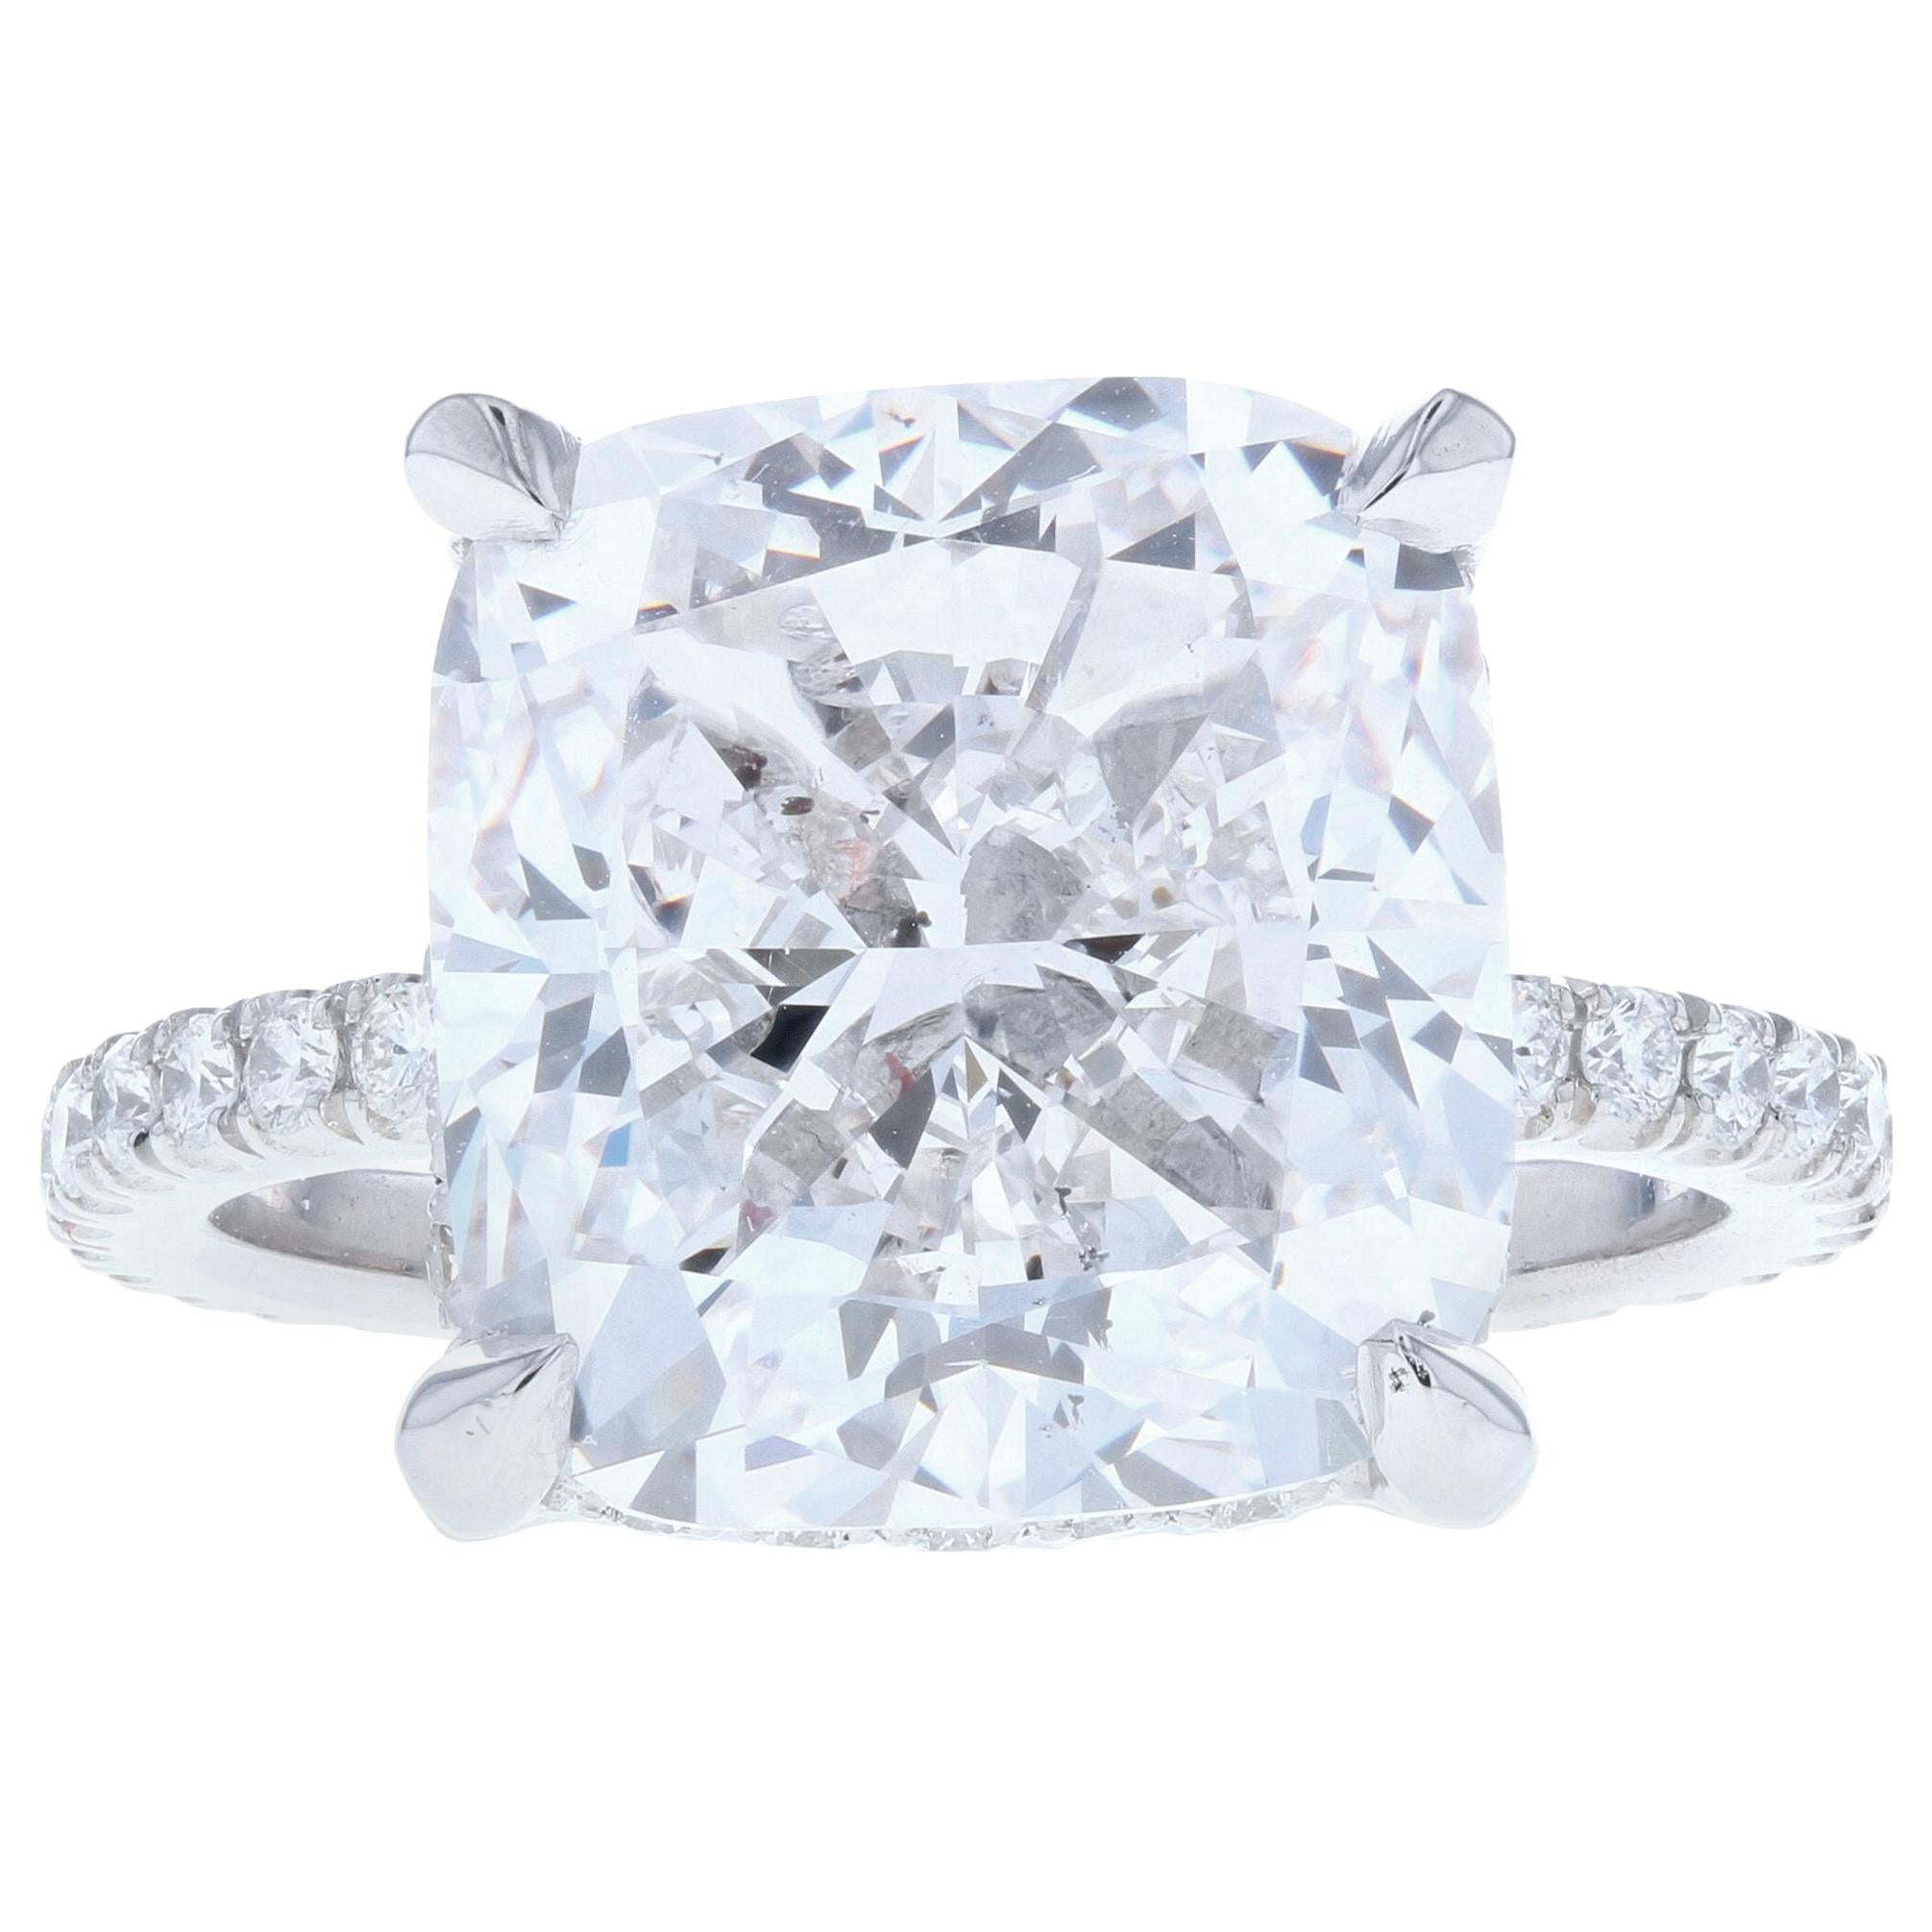 10 Carat Cushion Cut Diamond Engagement Ring with Diamond Pave and Hidden Halo For Sale